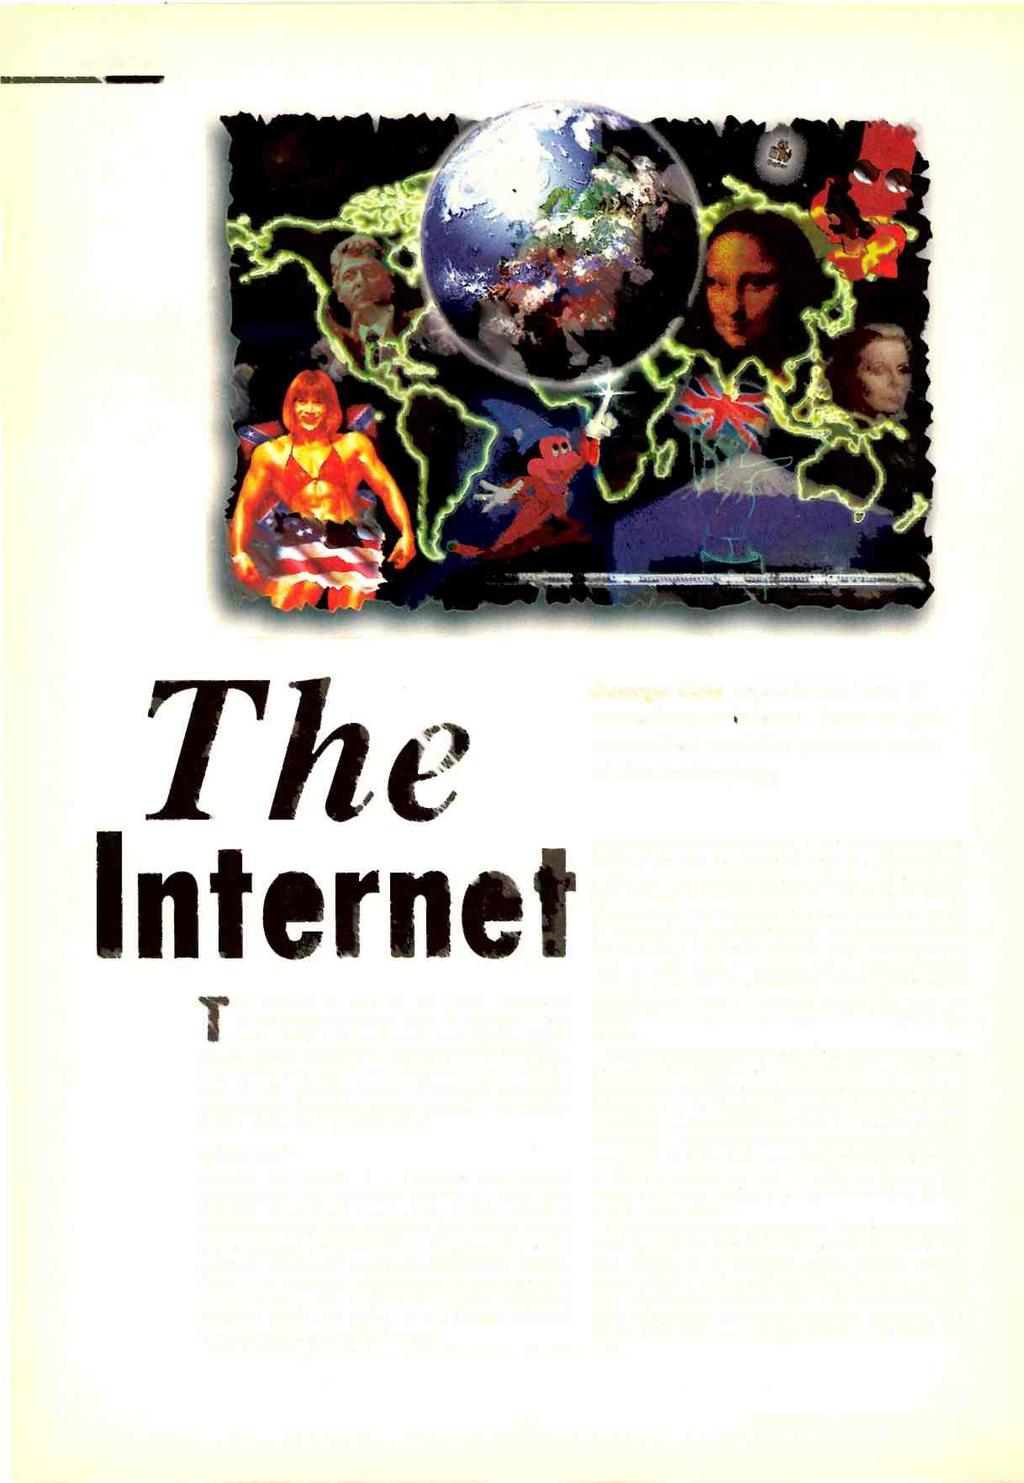 INTERNET e The Internet is one of the most remarkable developments of modern times.